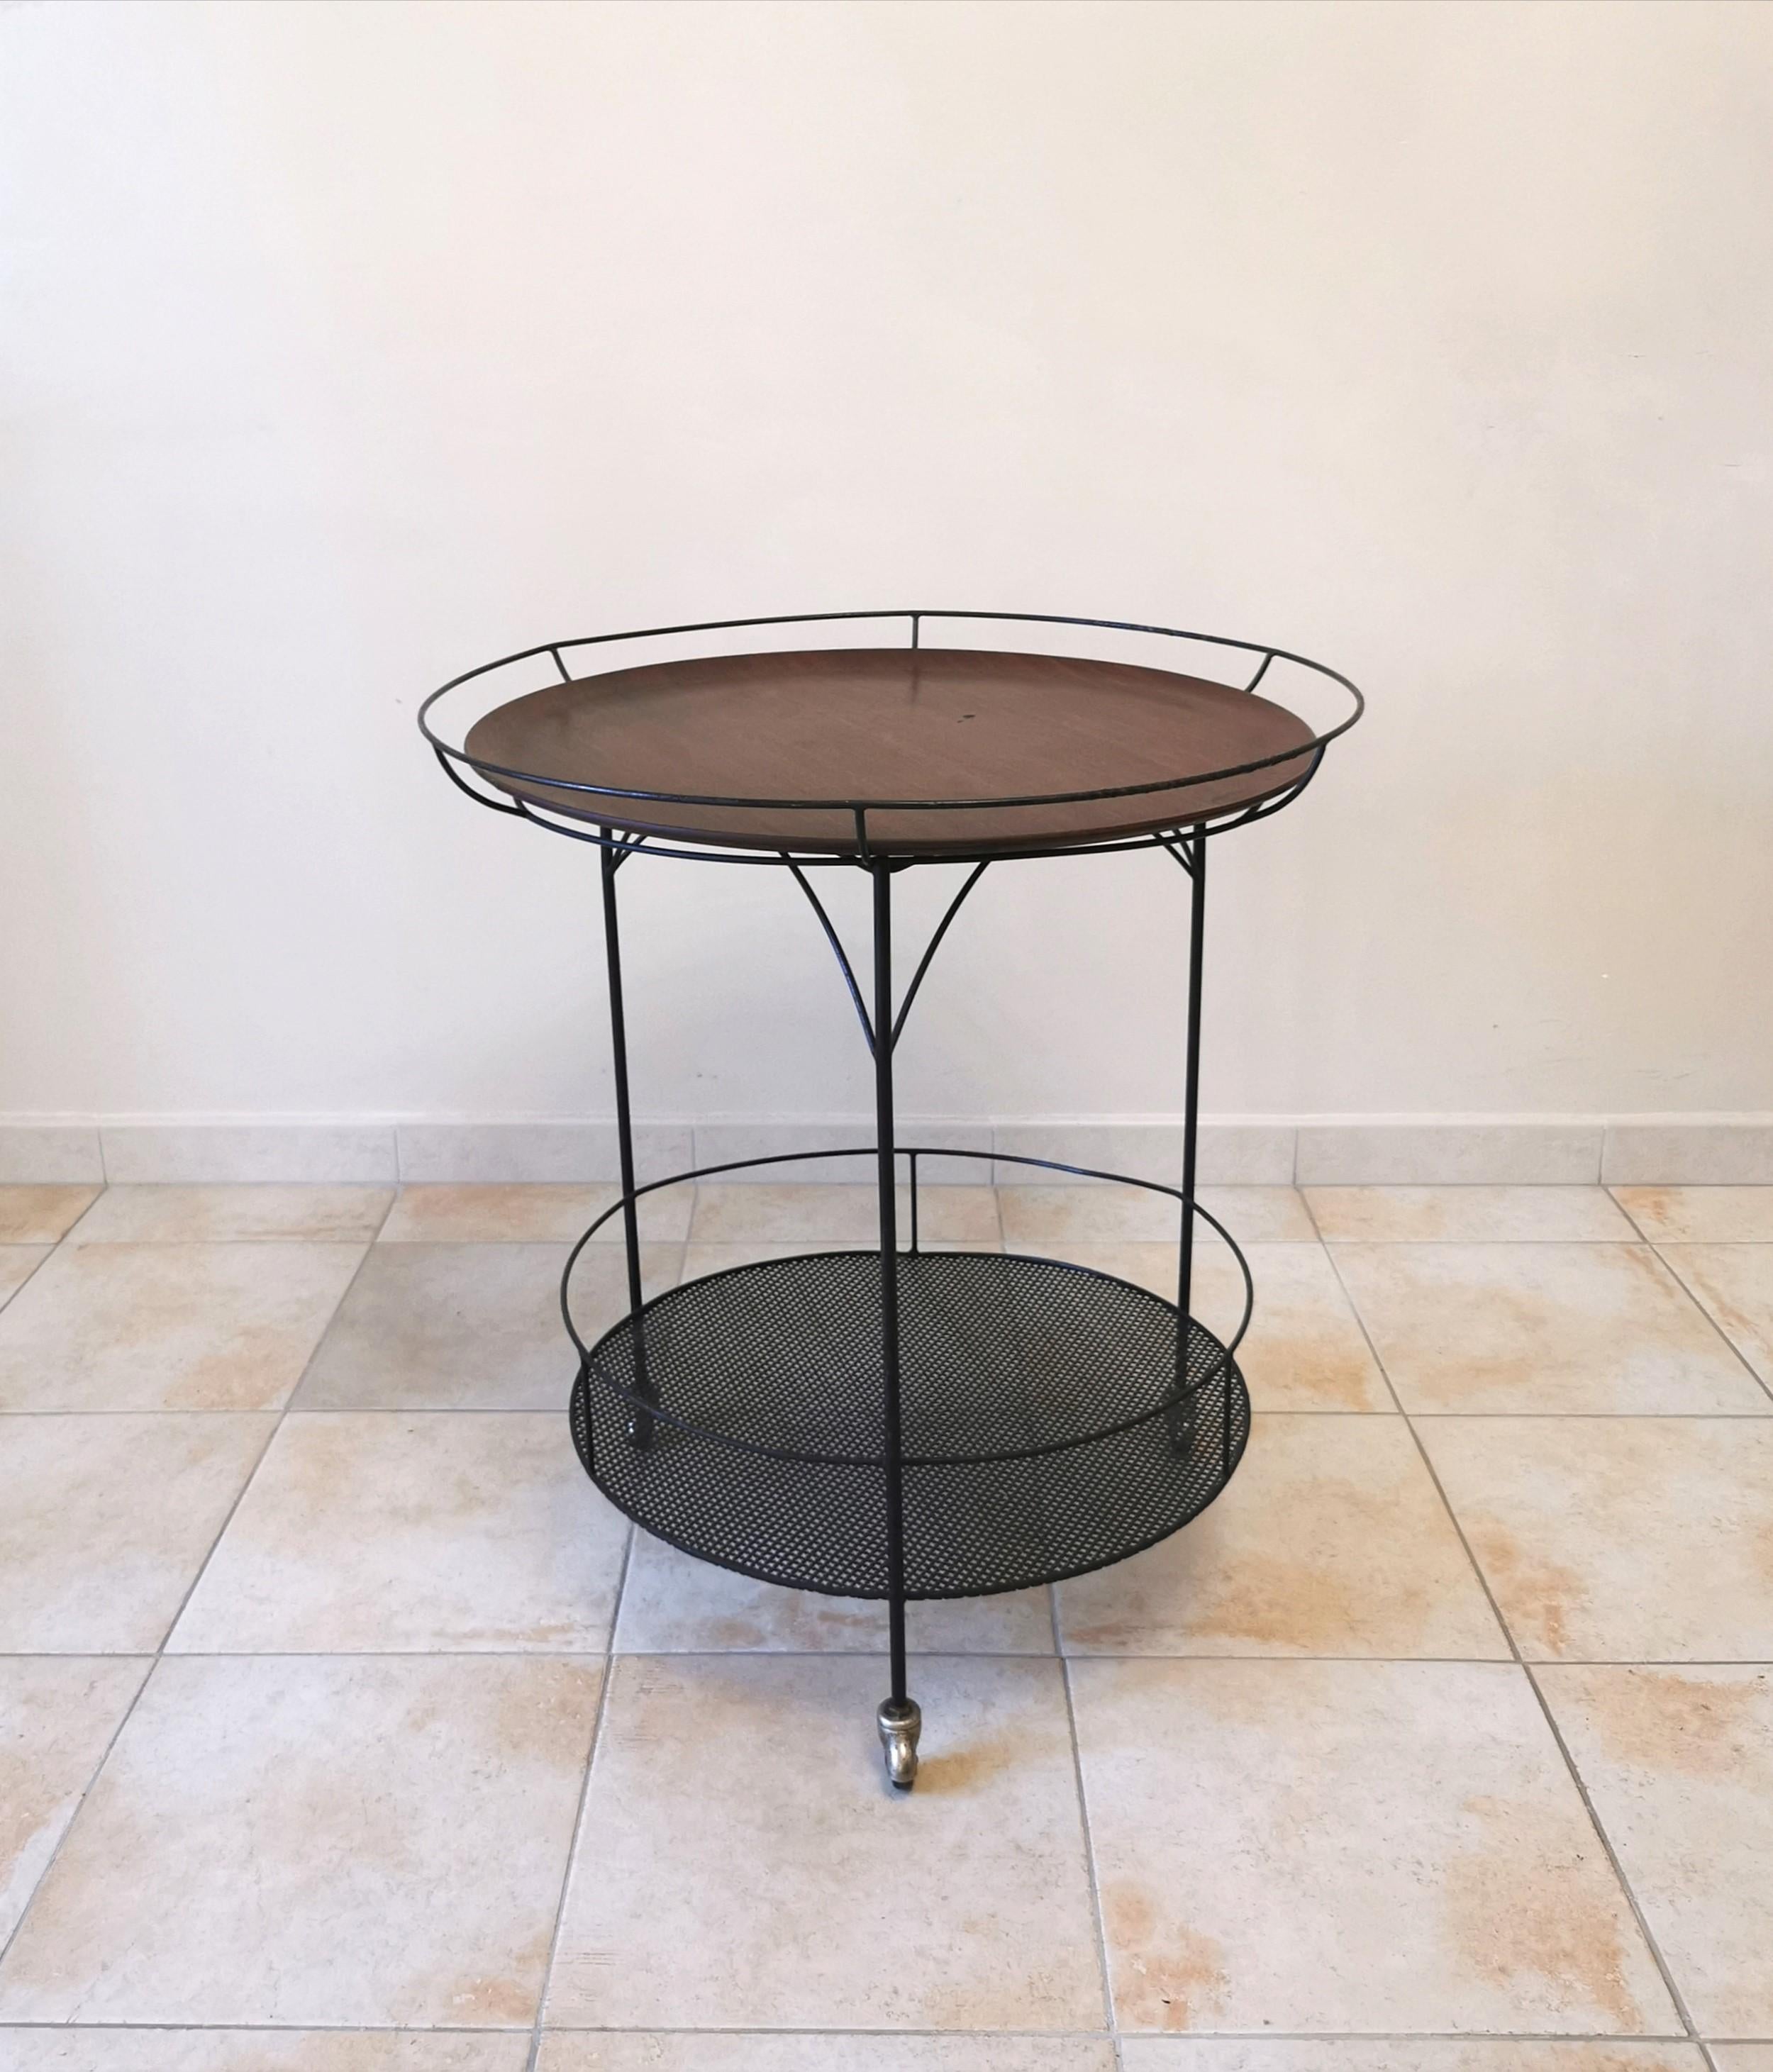 Midcentury Bar Cart Enameled Metal Wood Round Italian Design 1960s In Fair Condition For Sale In Palermo, IT